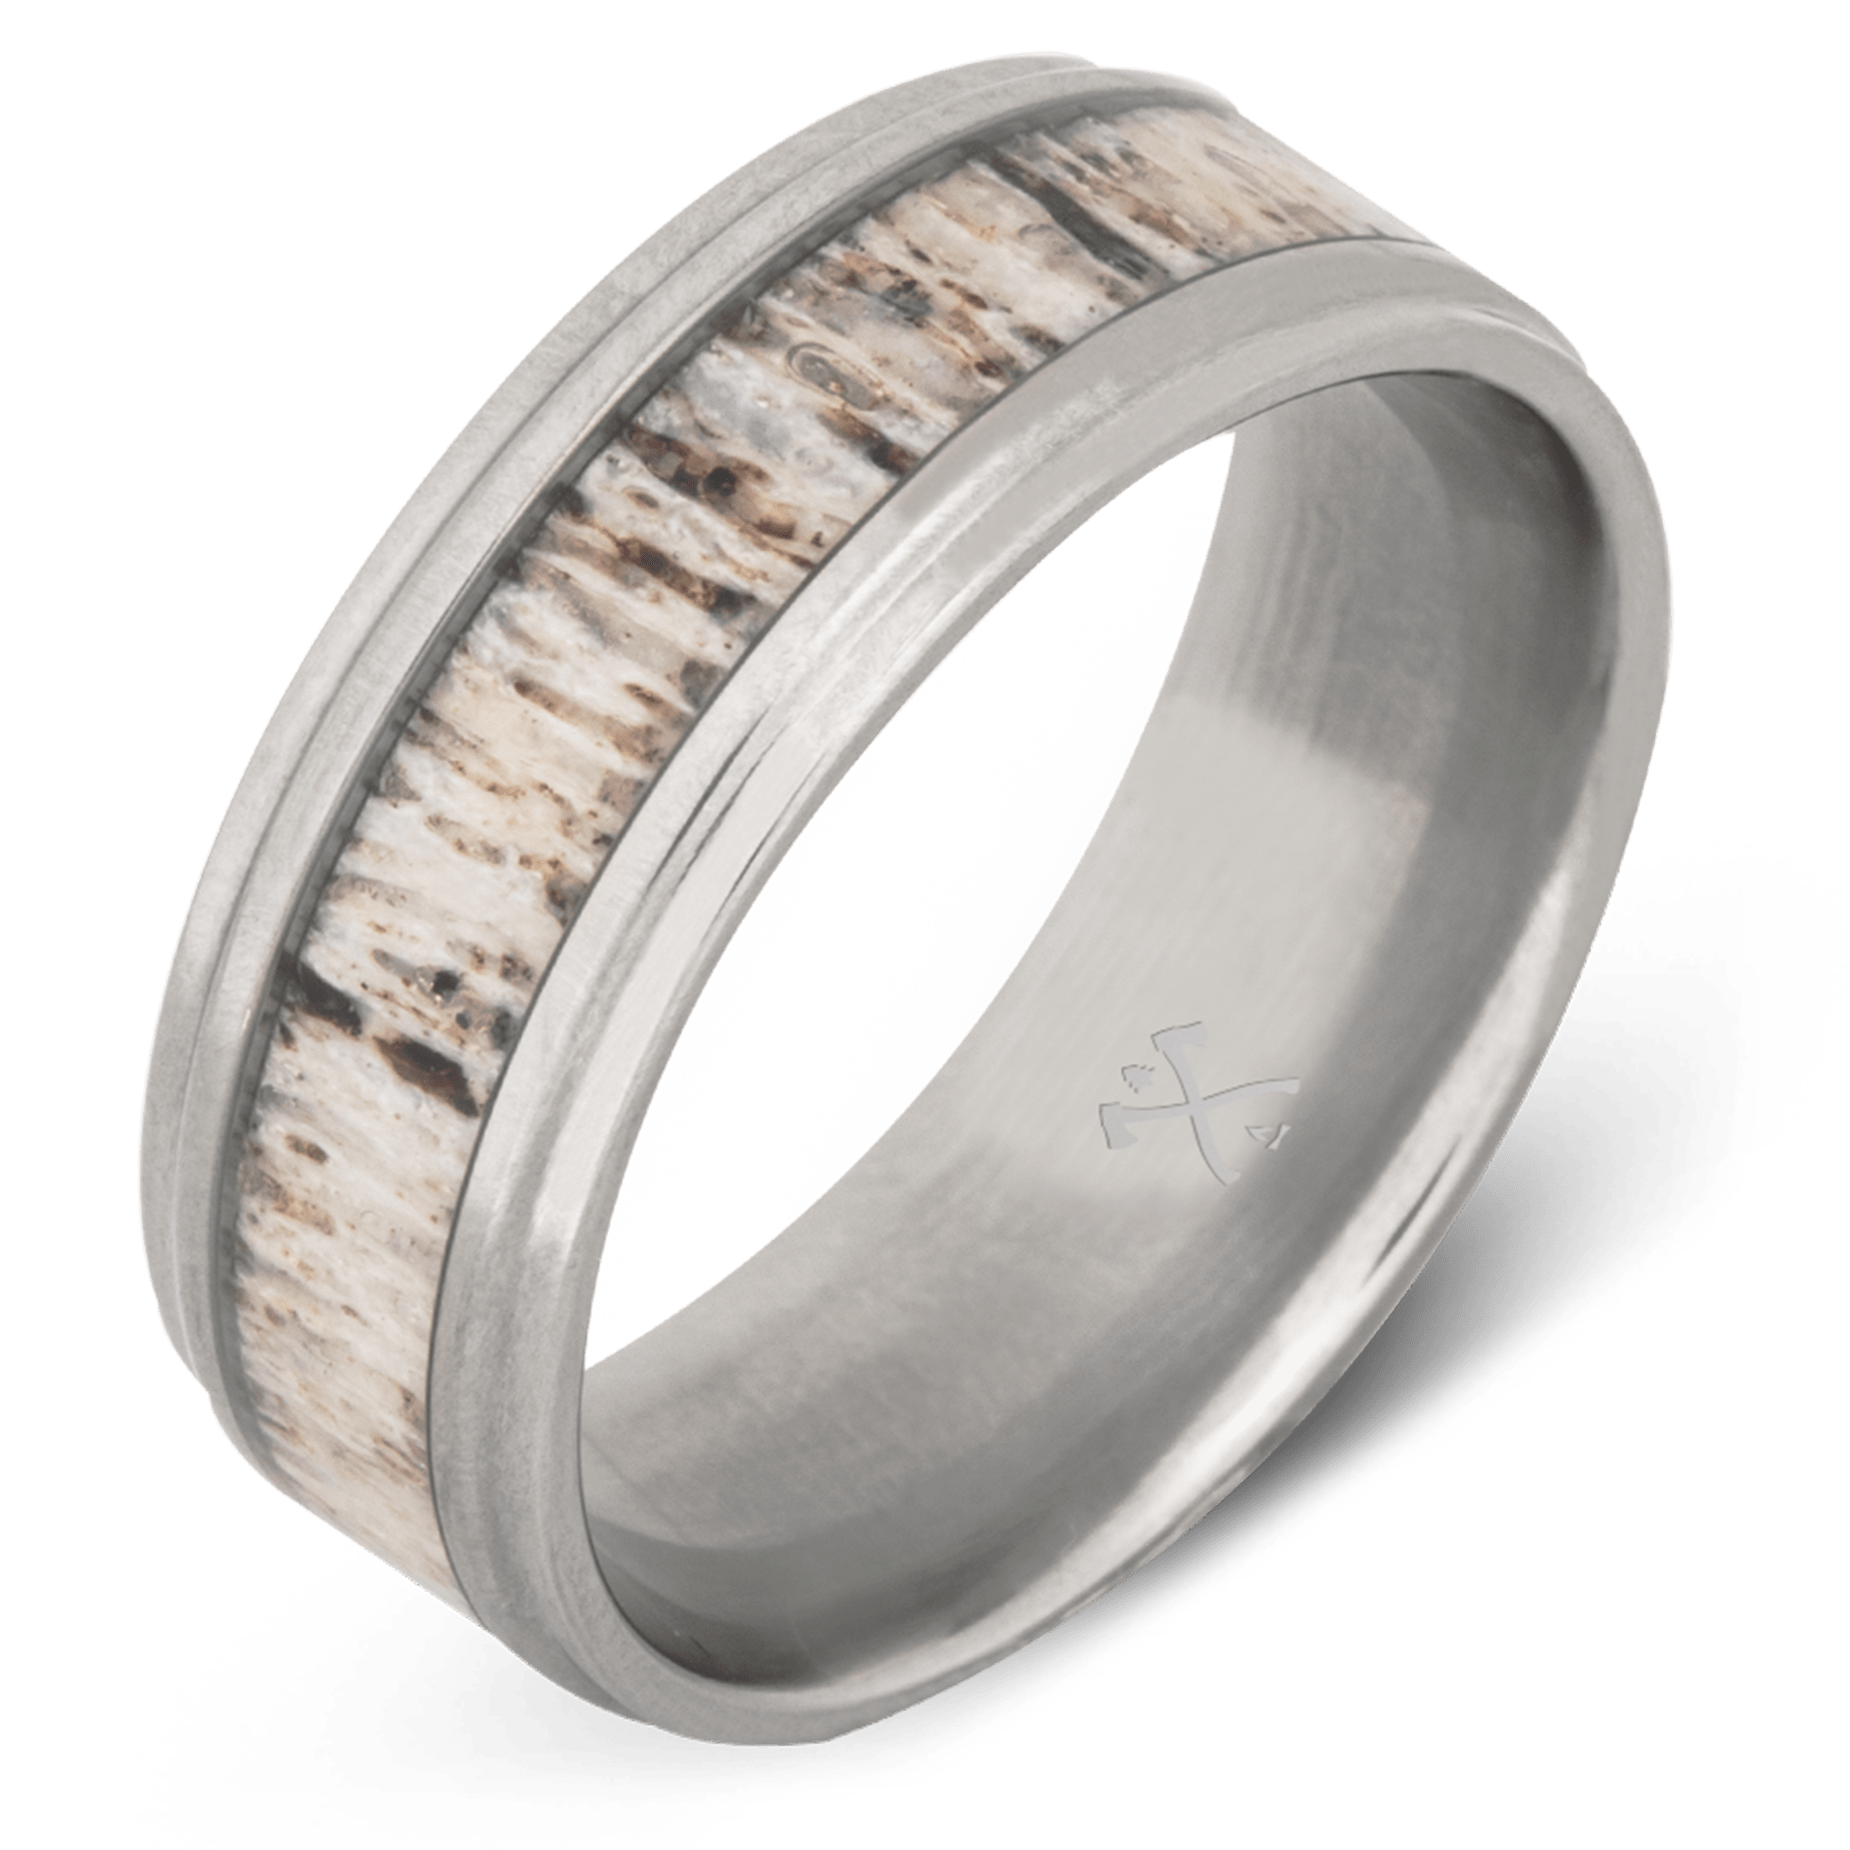 The Leif - Men's Wedding Rings - Manly Bands